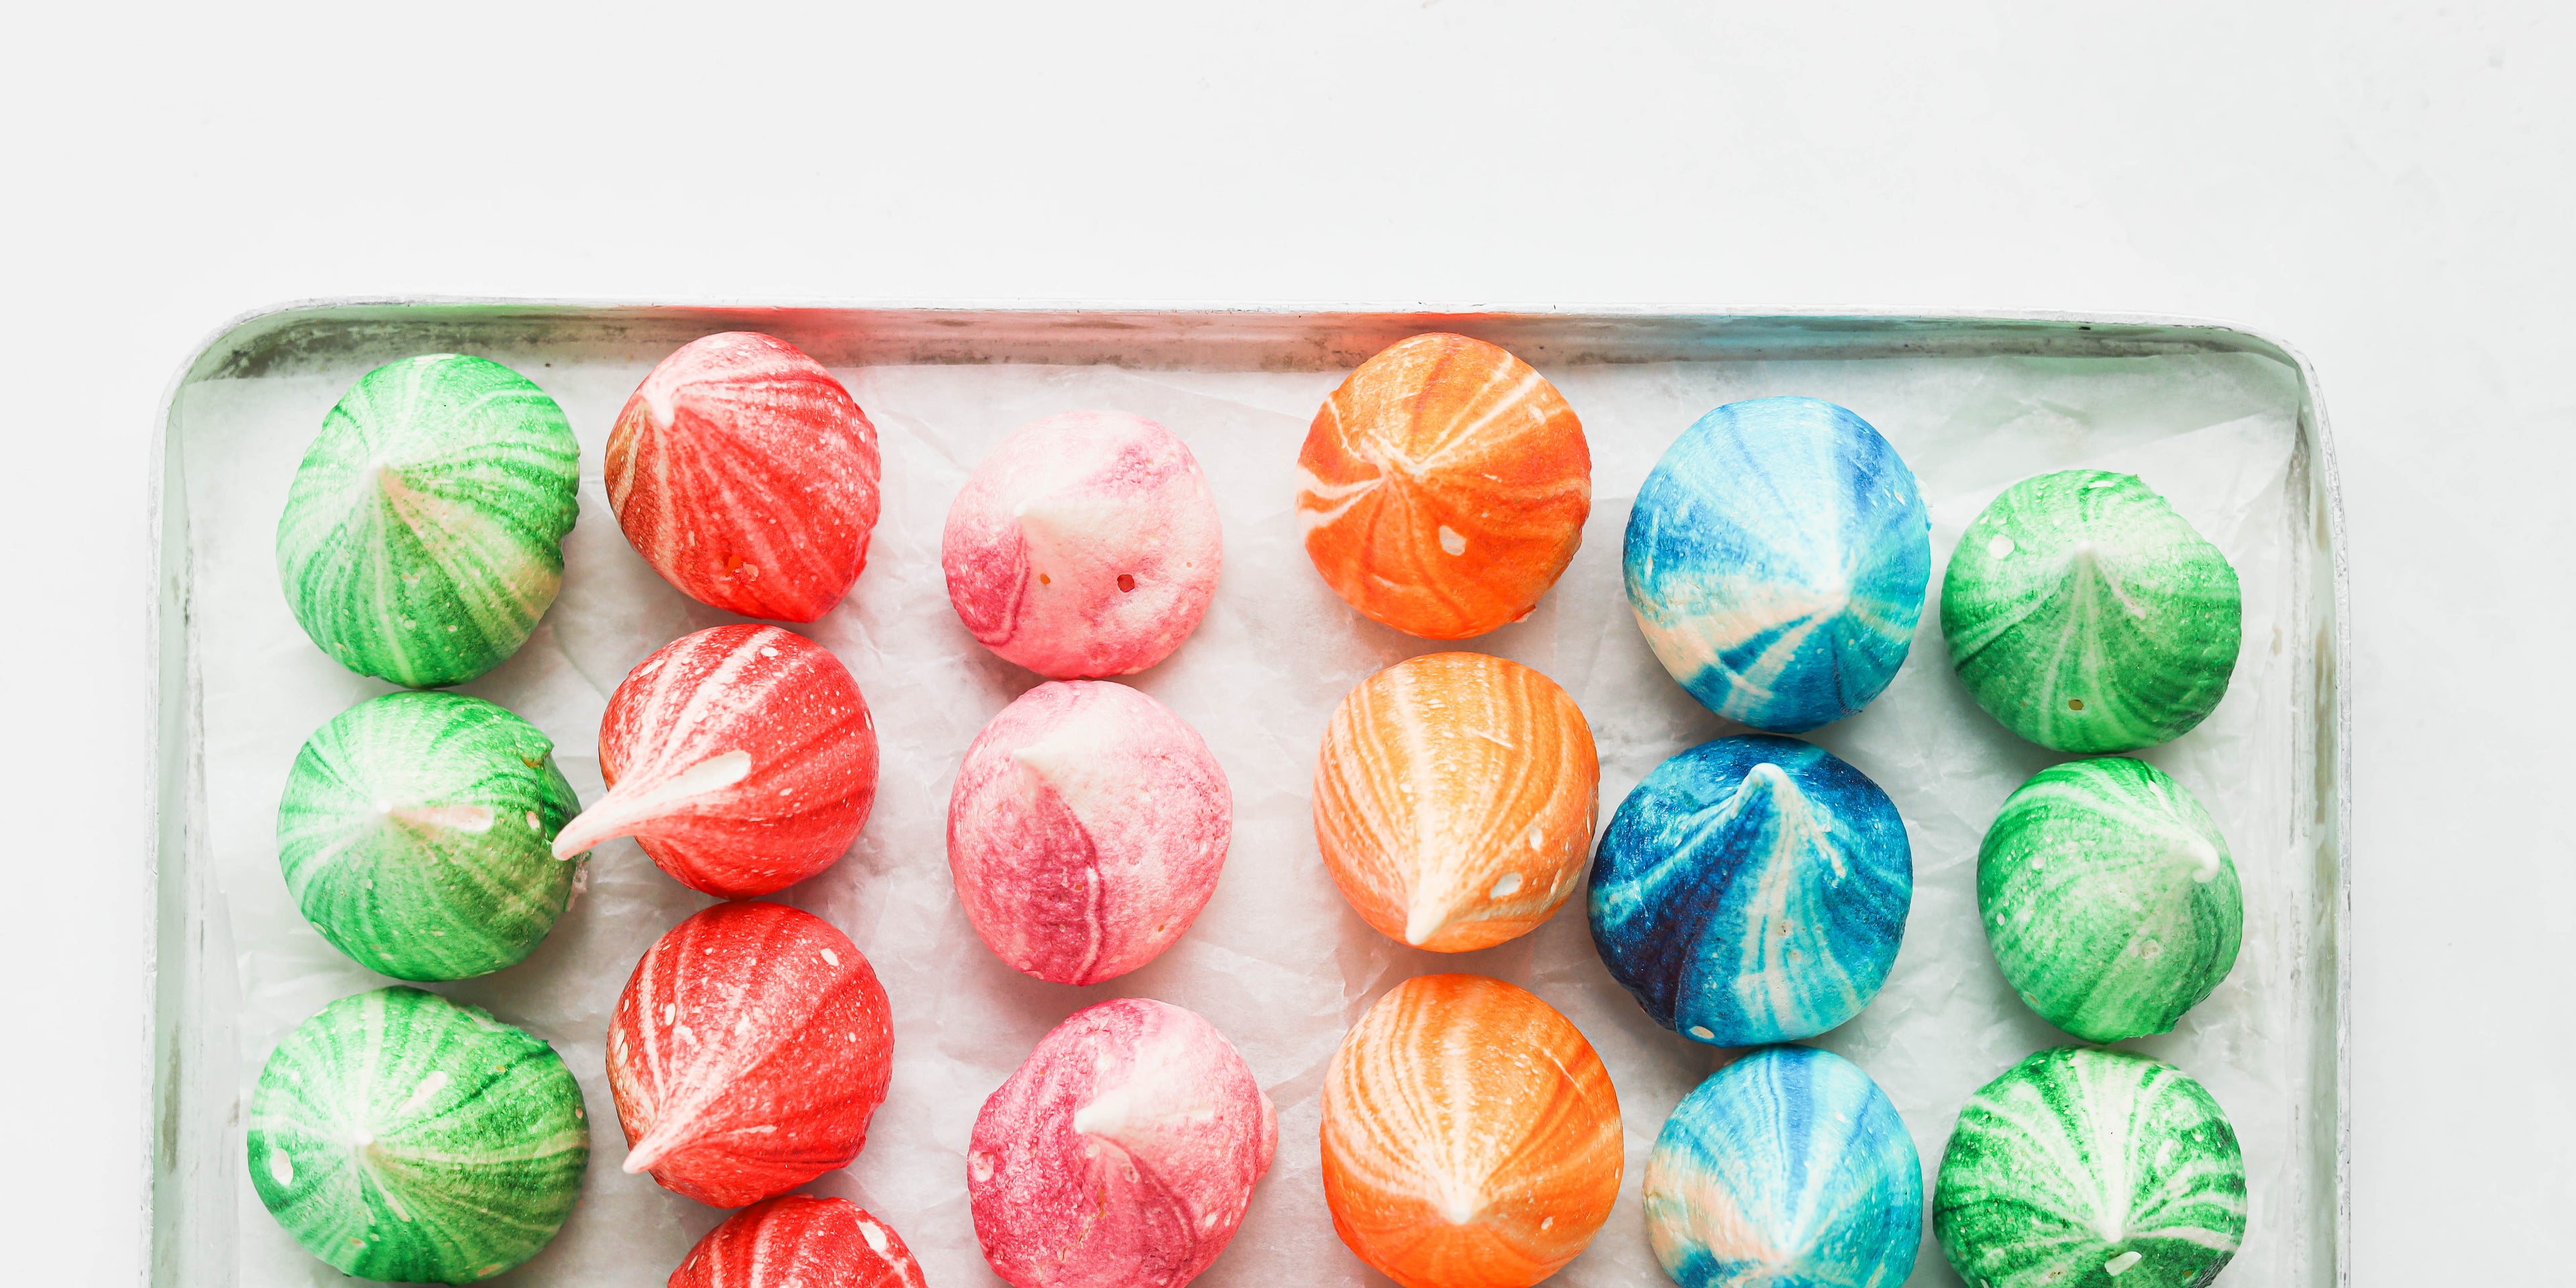 Small coloured meringue kisses in lines of 3 coloured green, red, pink, orange and blue